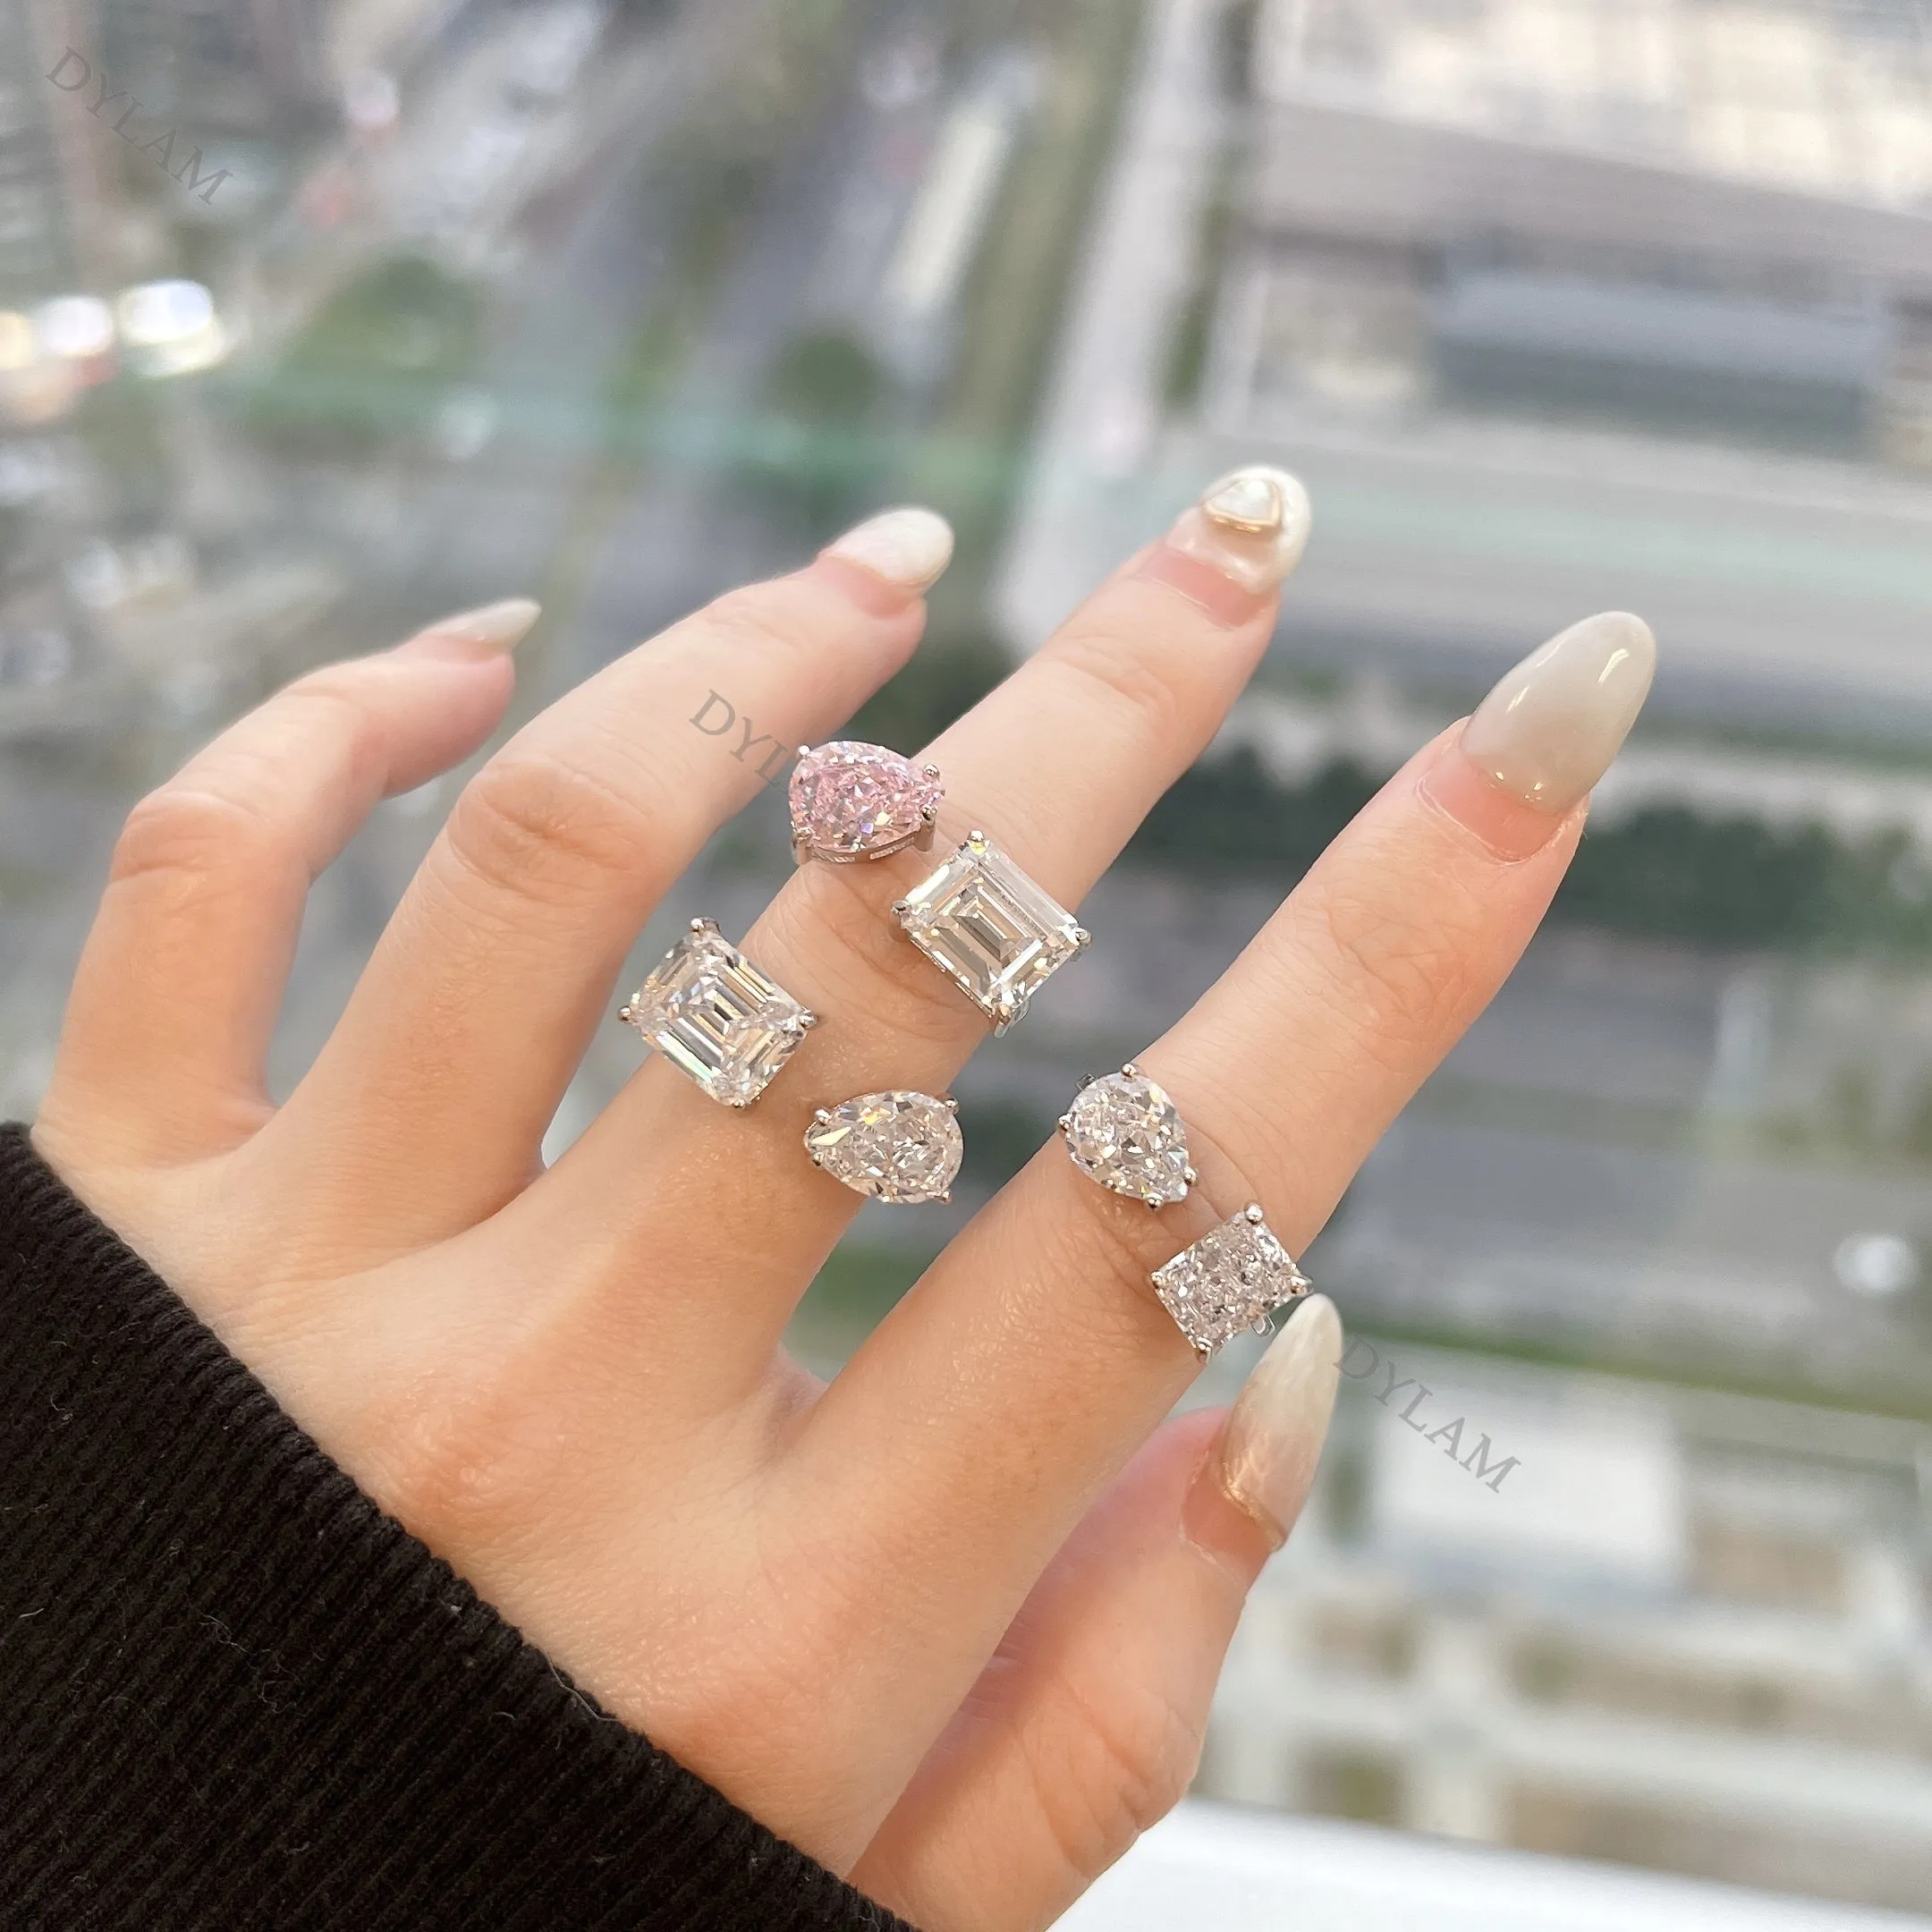 

Dylam S925 8A cz kylie jenner style heart pear pink oval emerald cut square iced out adjustable engagement wedding silver rings